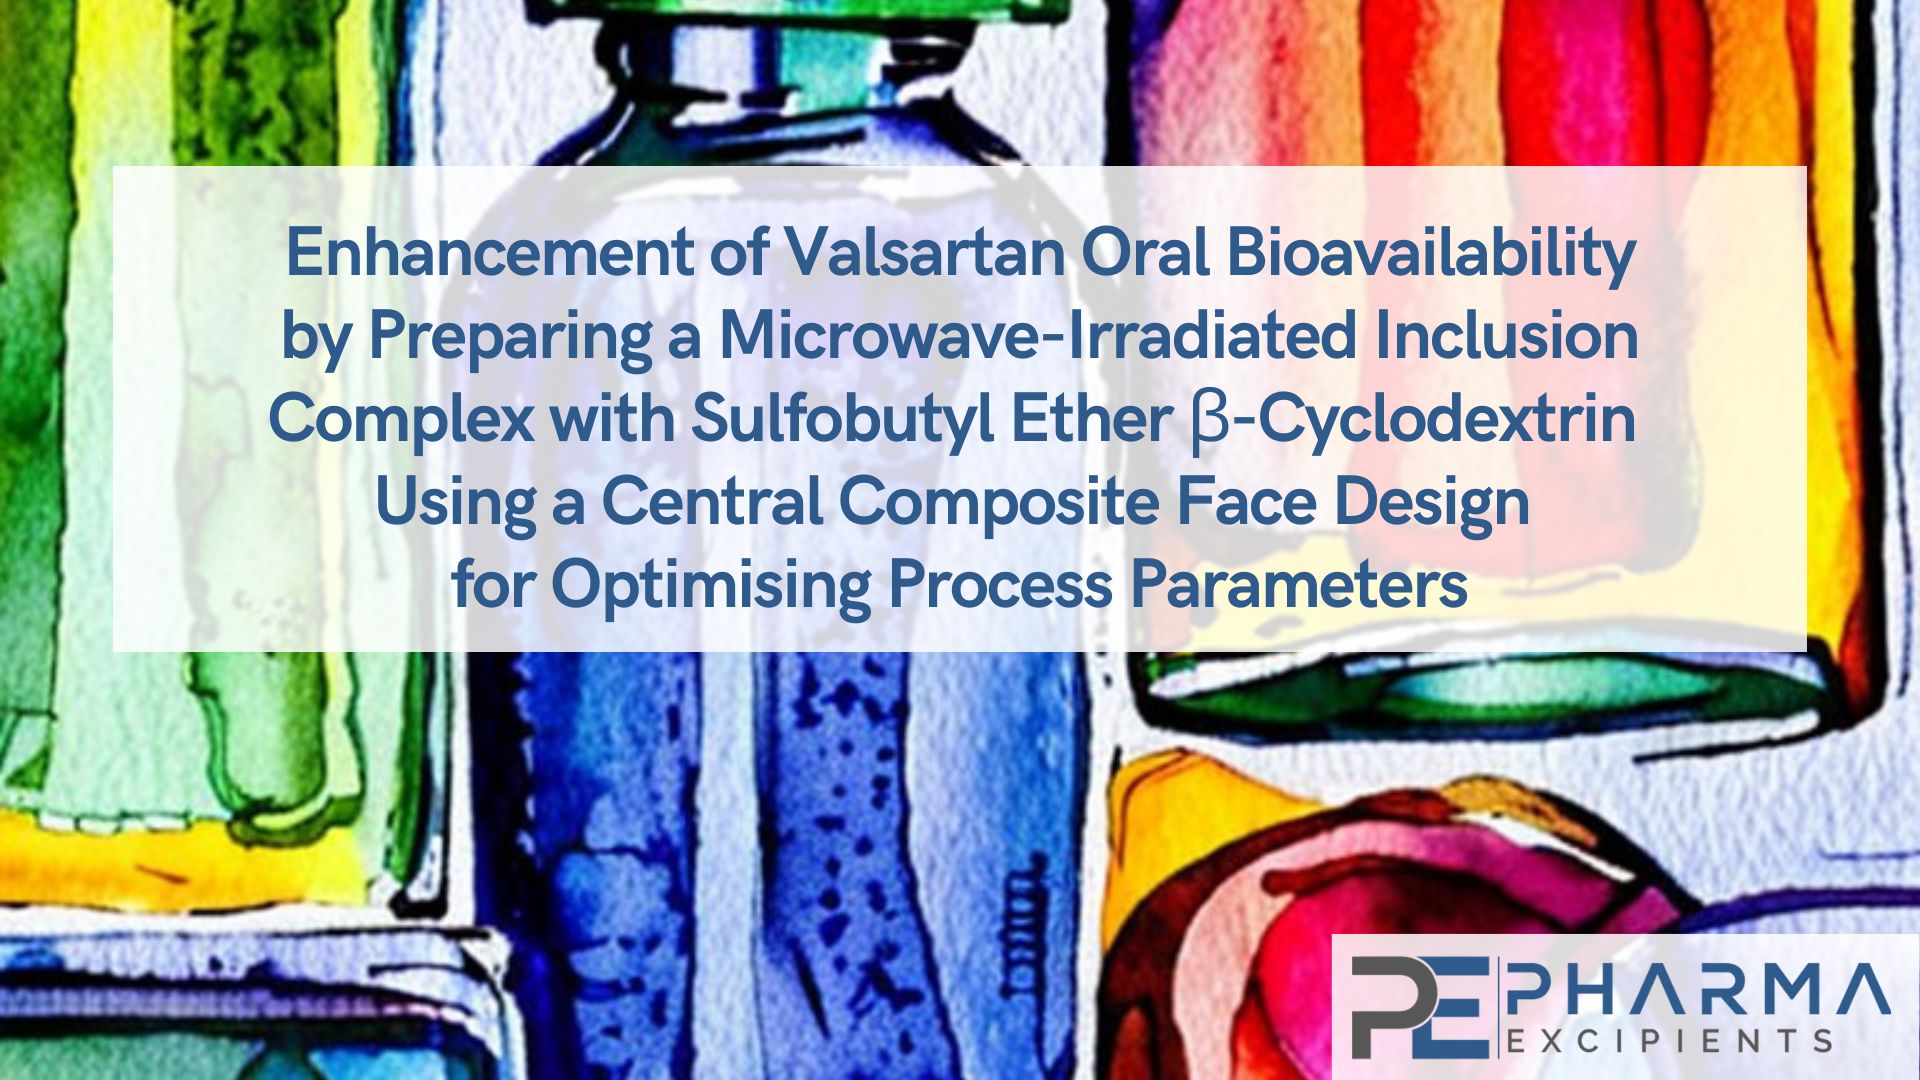 Enhancement of Valsartan Oral Bioavailability by Preparing a Microwave-Irradiated Inclusion Complex with Sulfobutyl Ether β-Cyclodextrin Using a Central Composite Face Design for Optimising Process Parameters